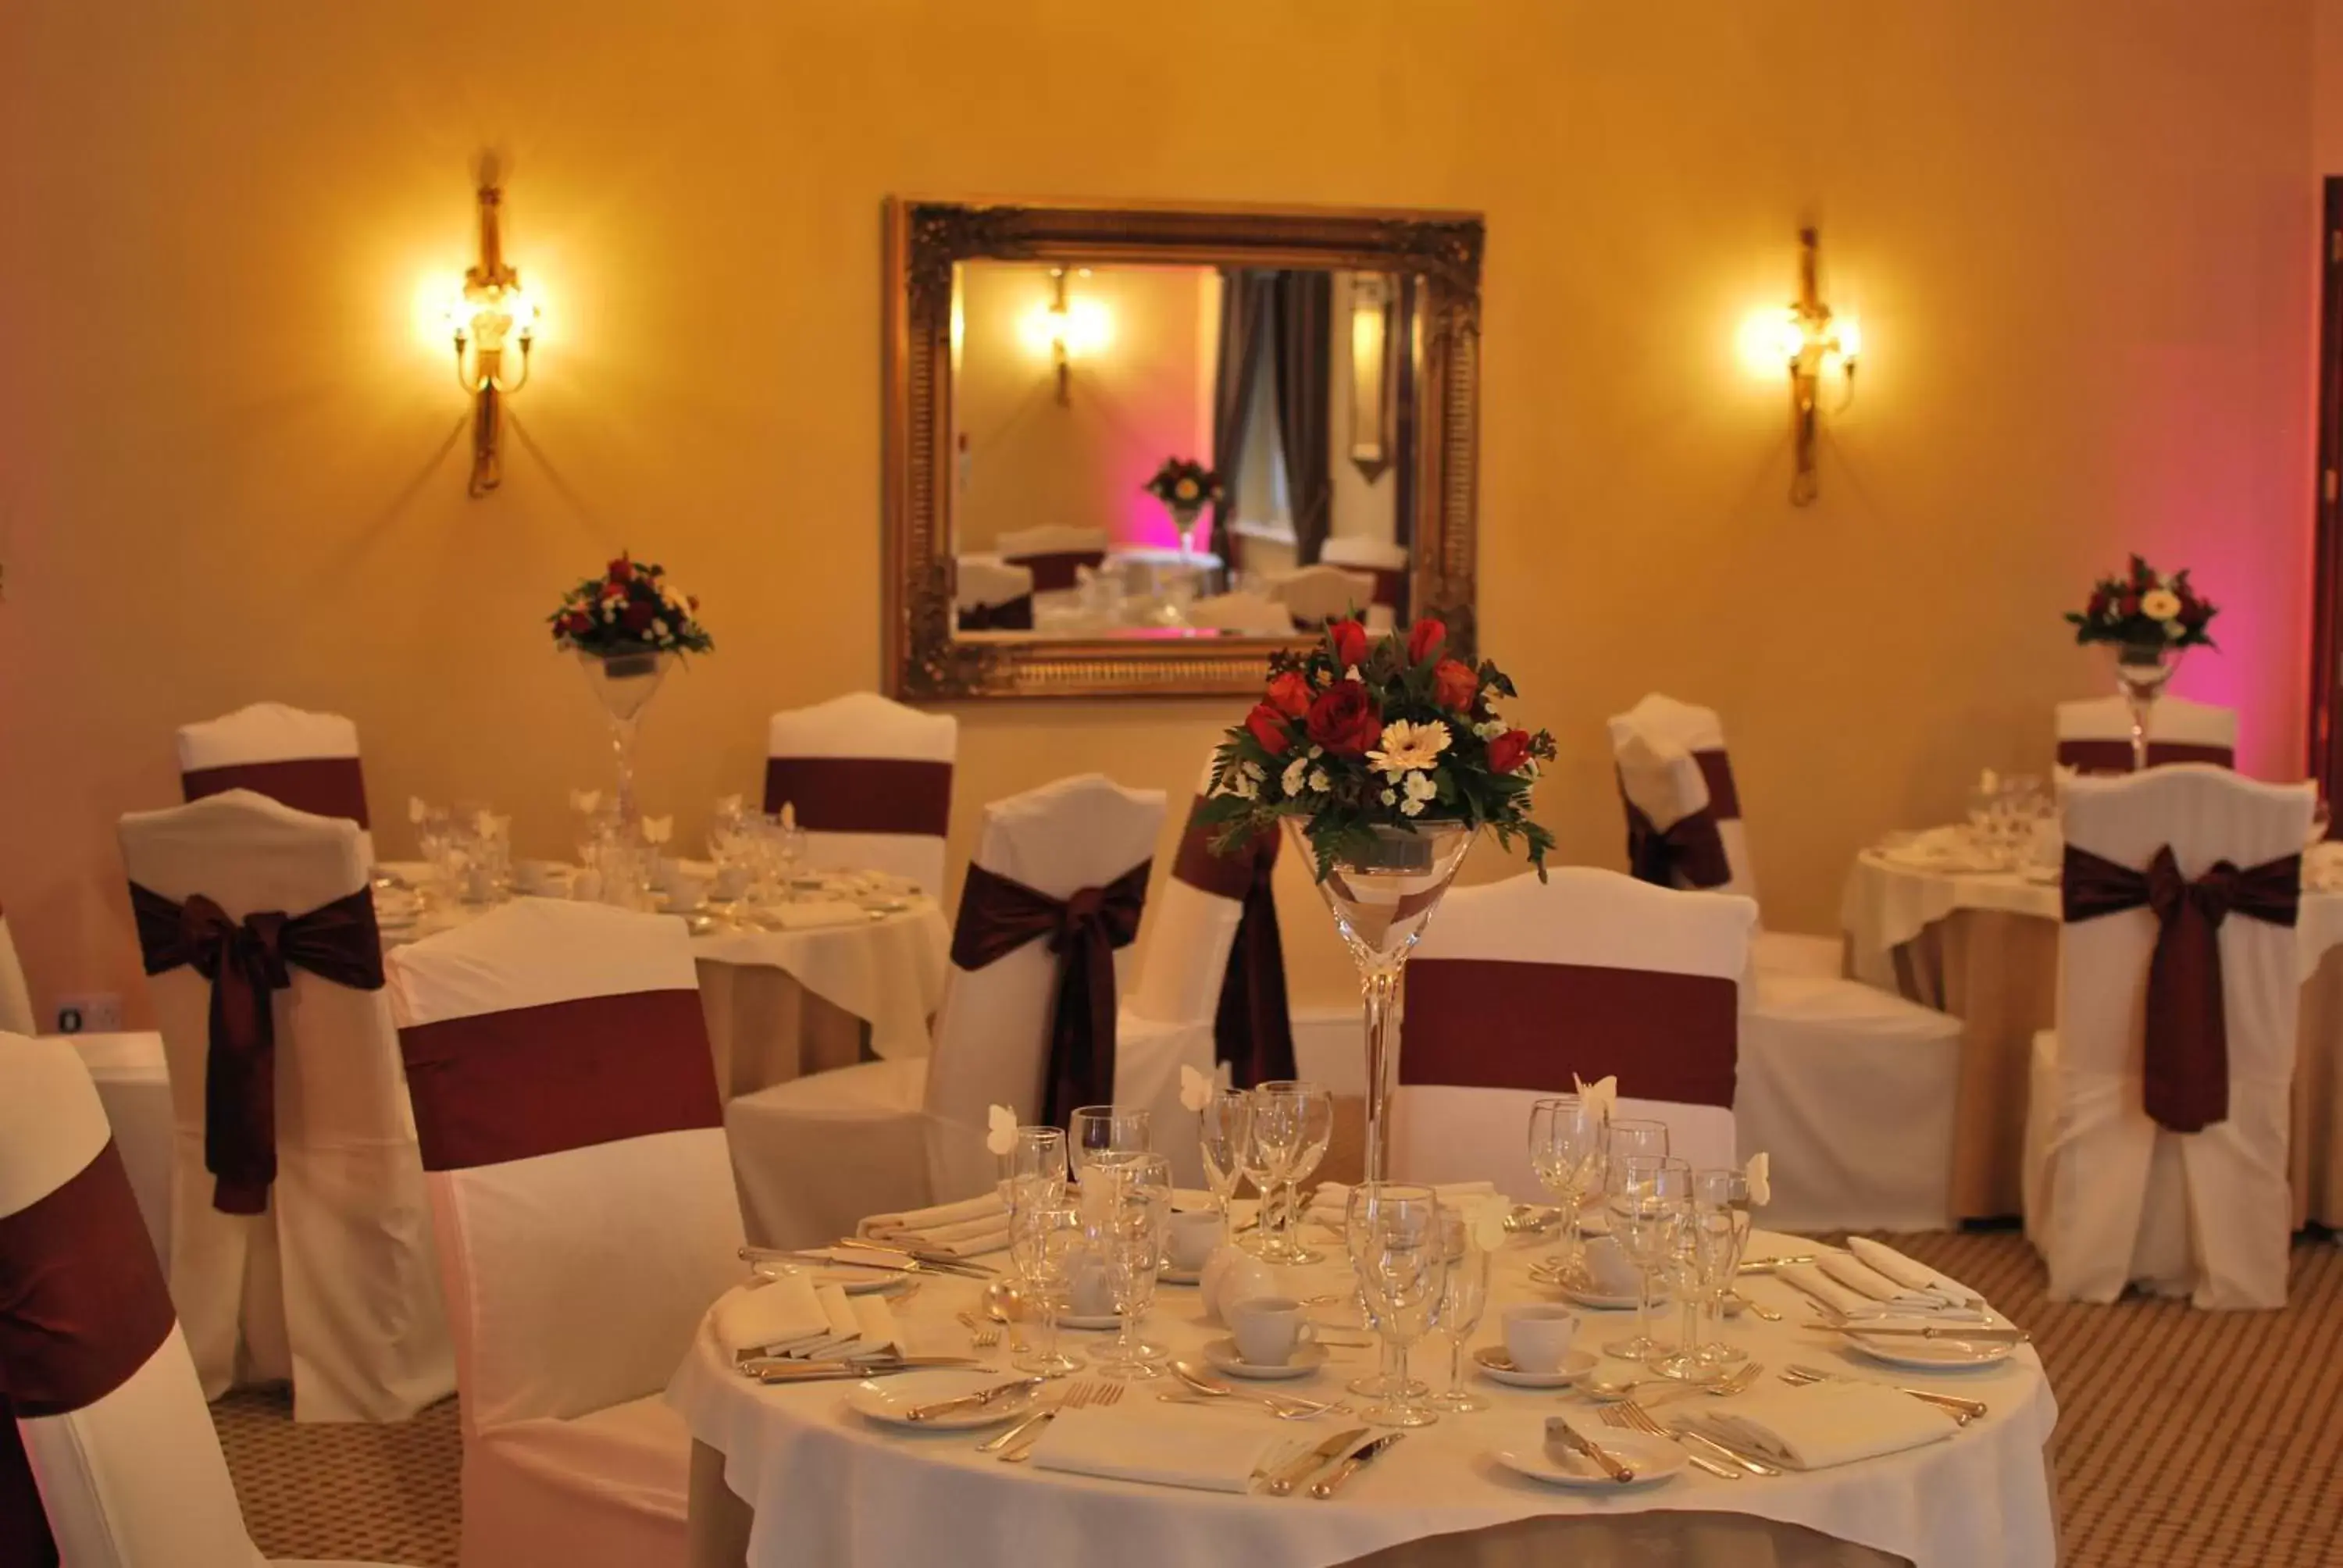 Banquet/Function facilities, Banquet Facilities in Dovecliff Hall Hotel